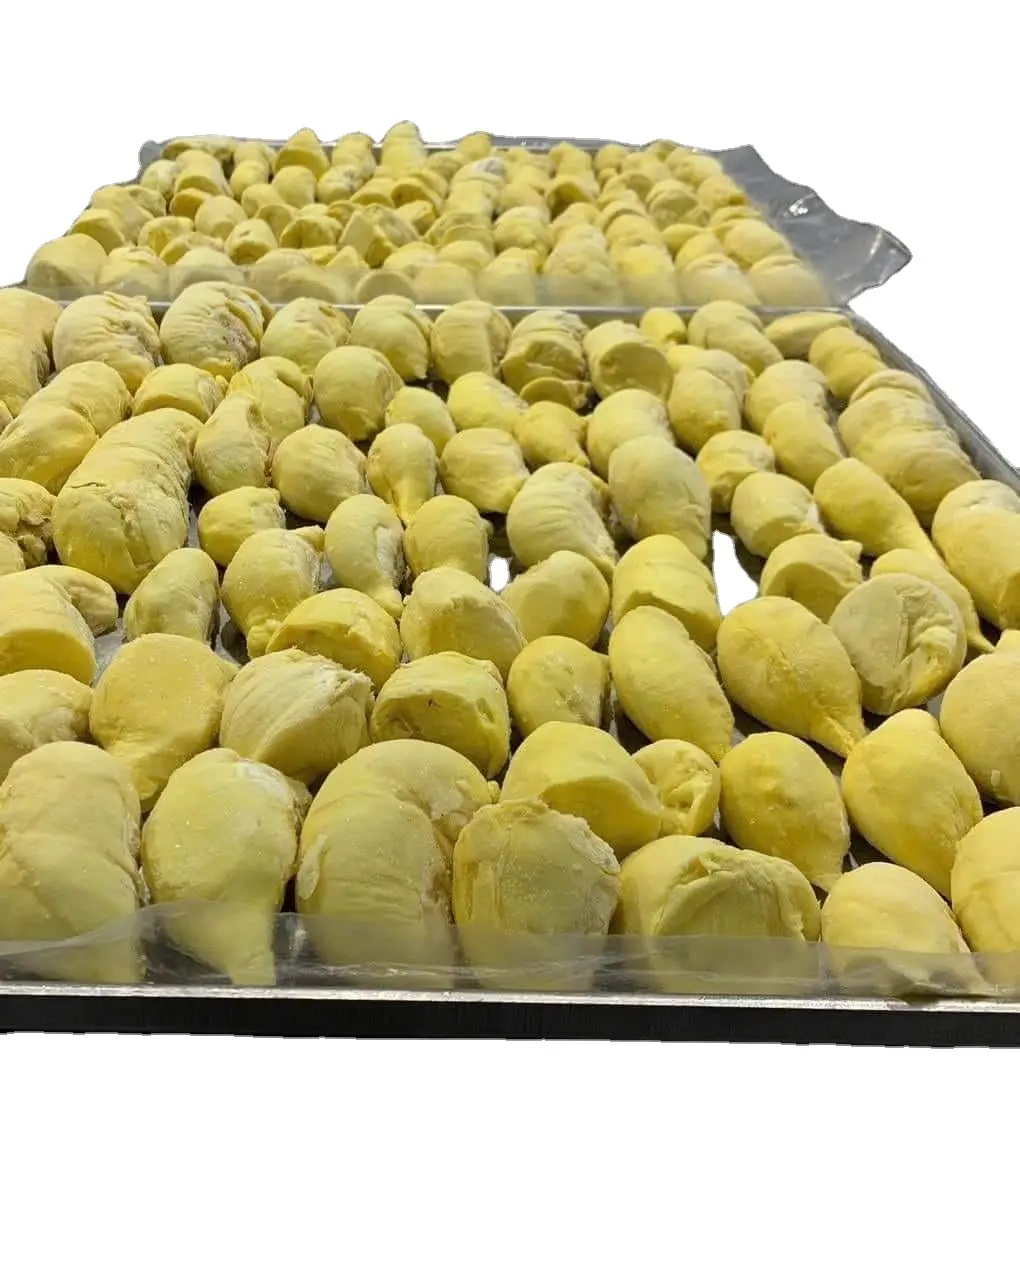 Wholesale fresh - frozen IQF DURIAN in Viet Nam with the best price